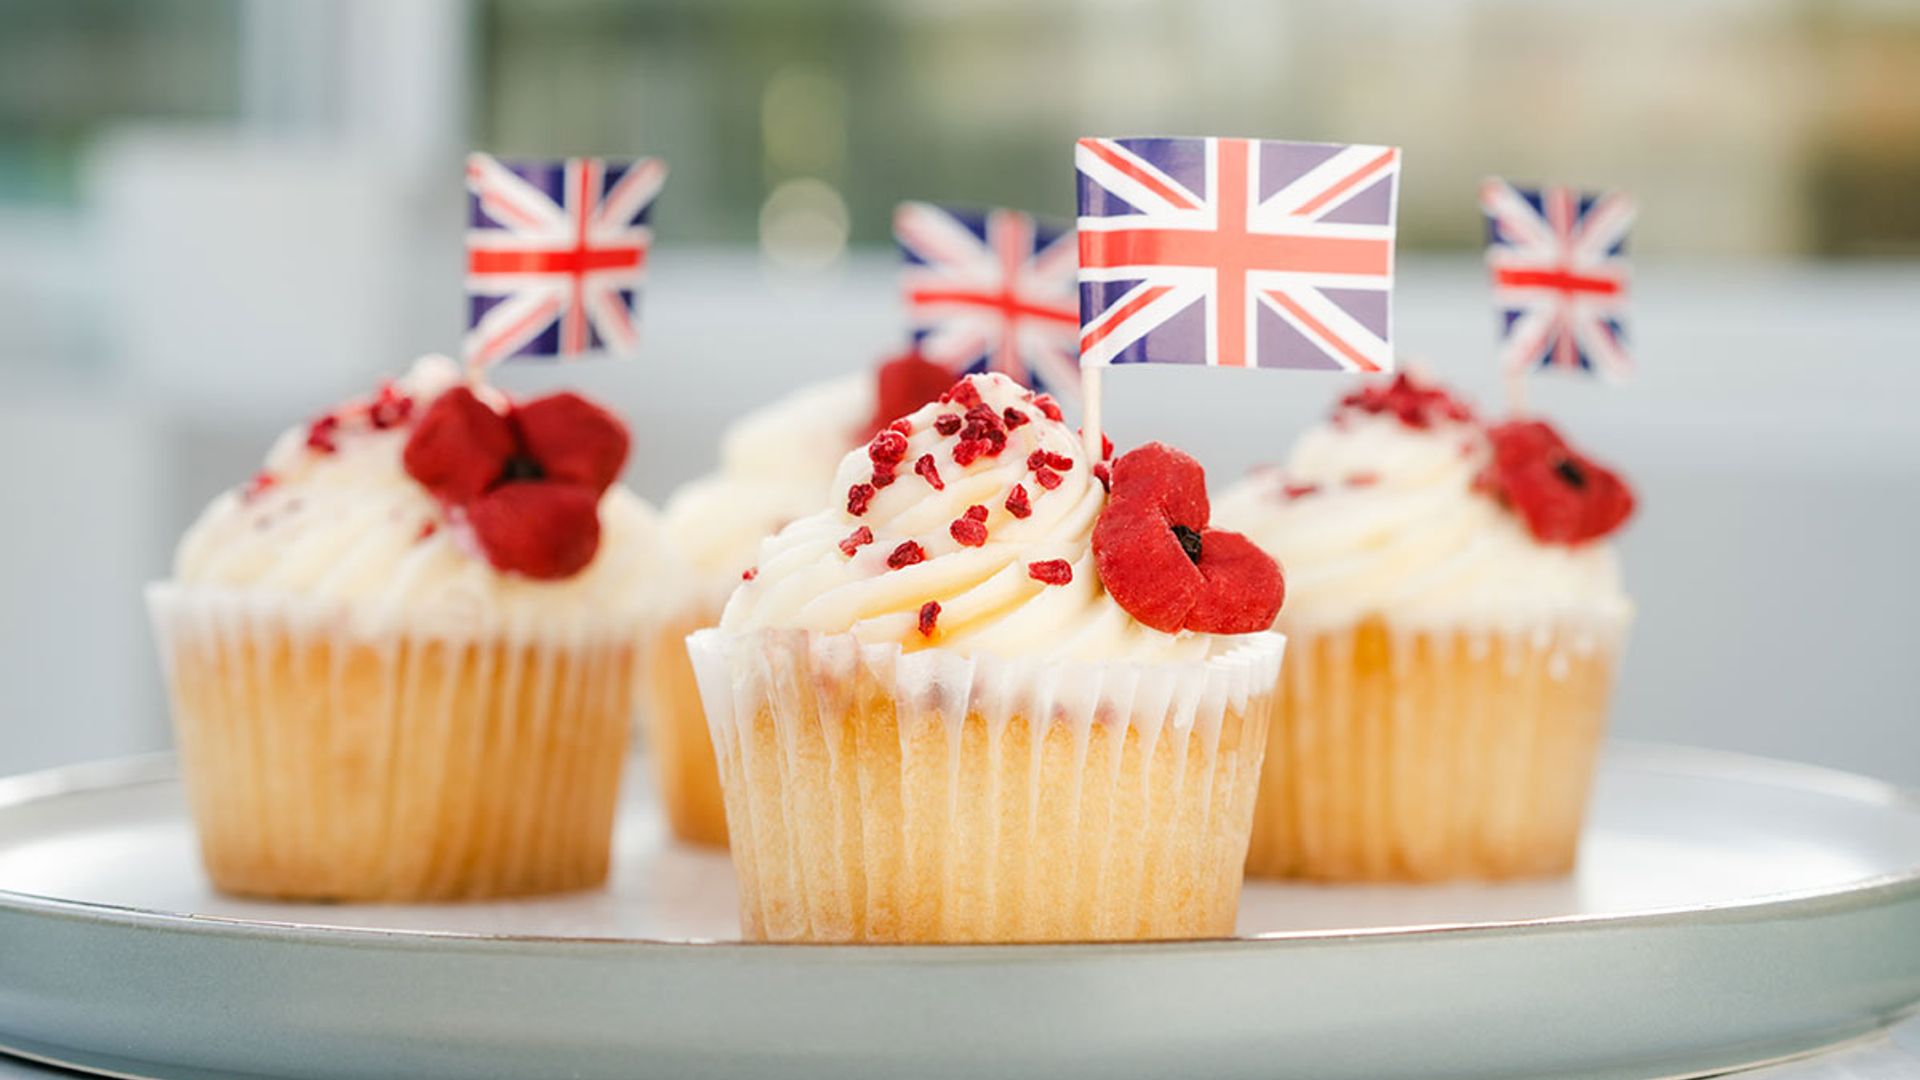 Royal Jubilee food & drink ideas to wow your guests with